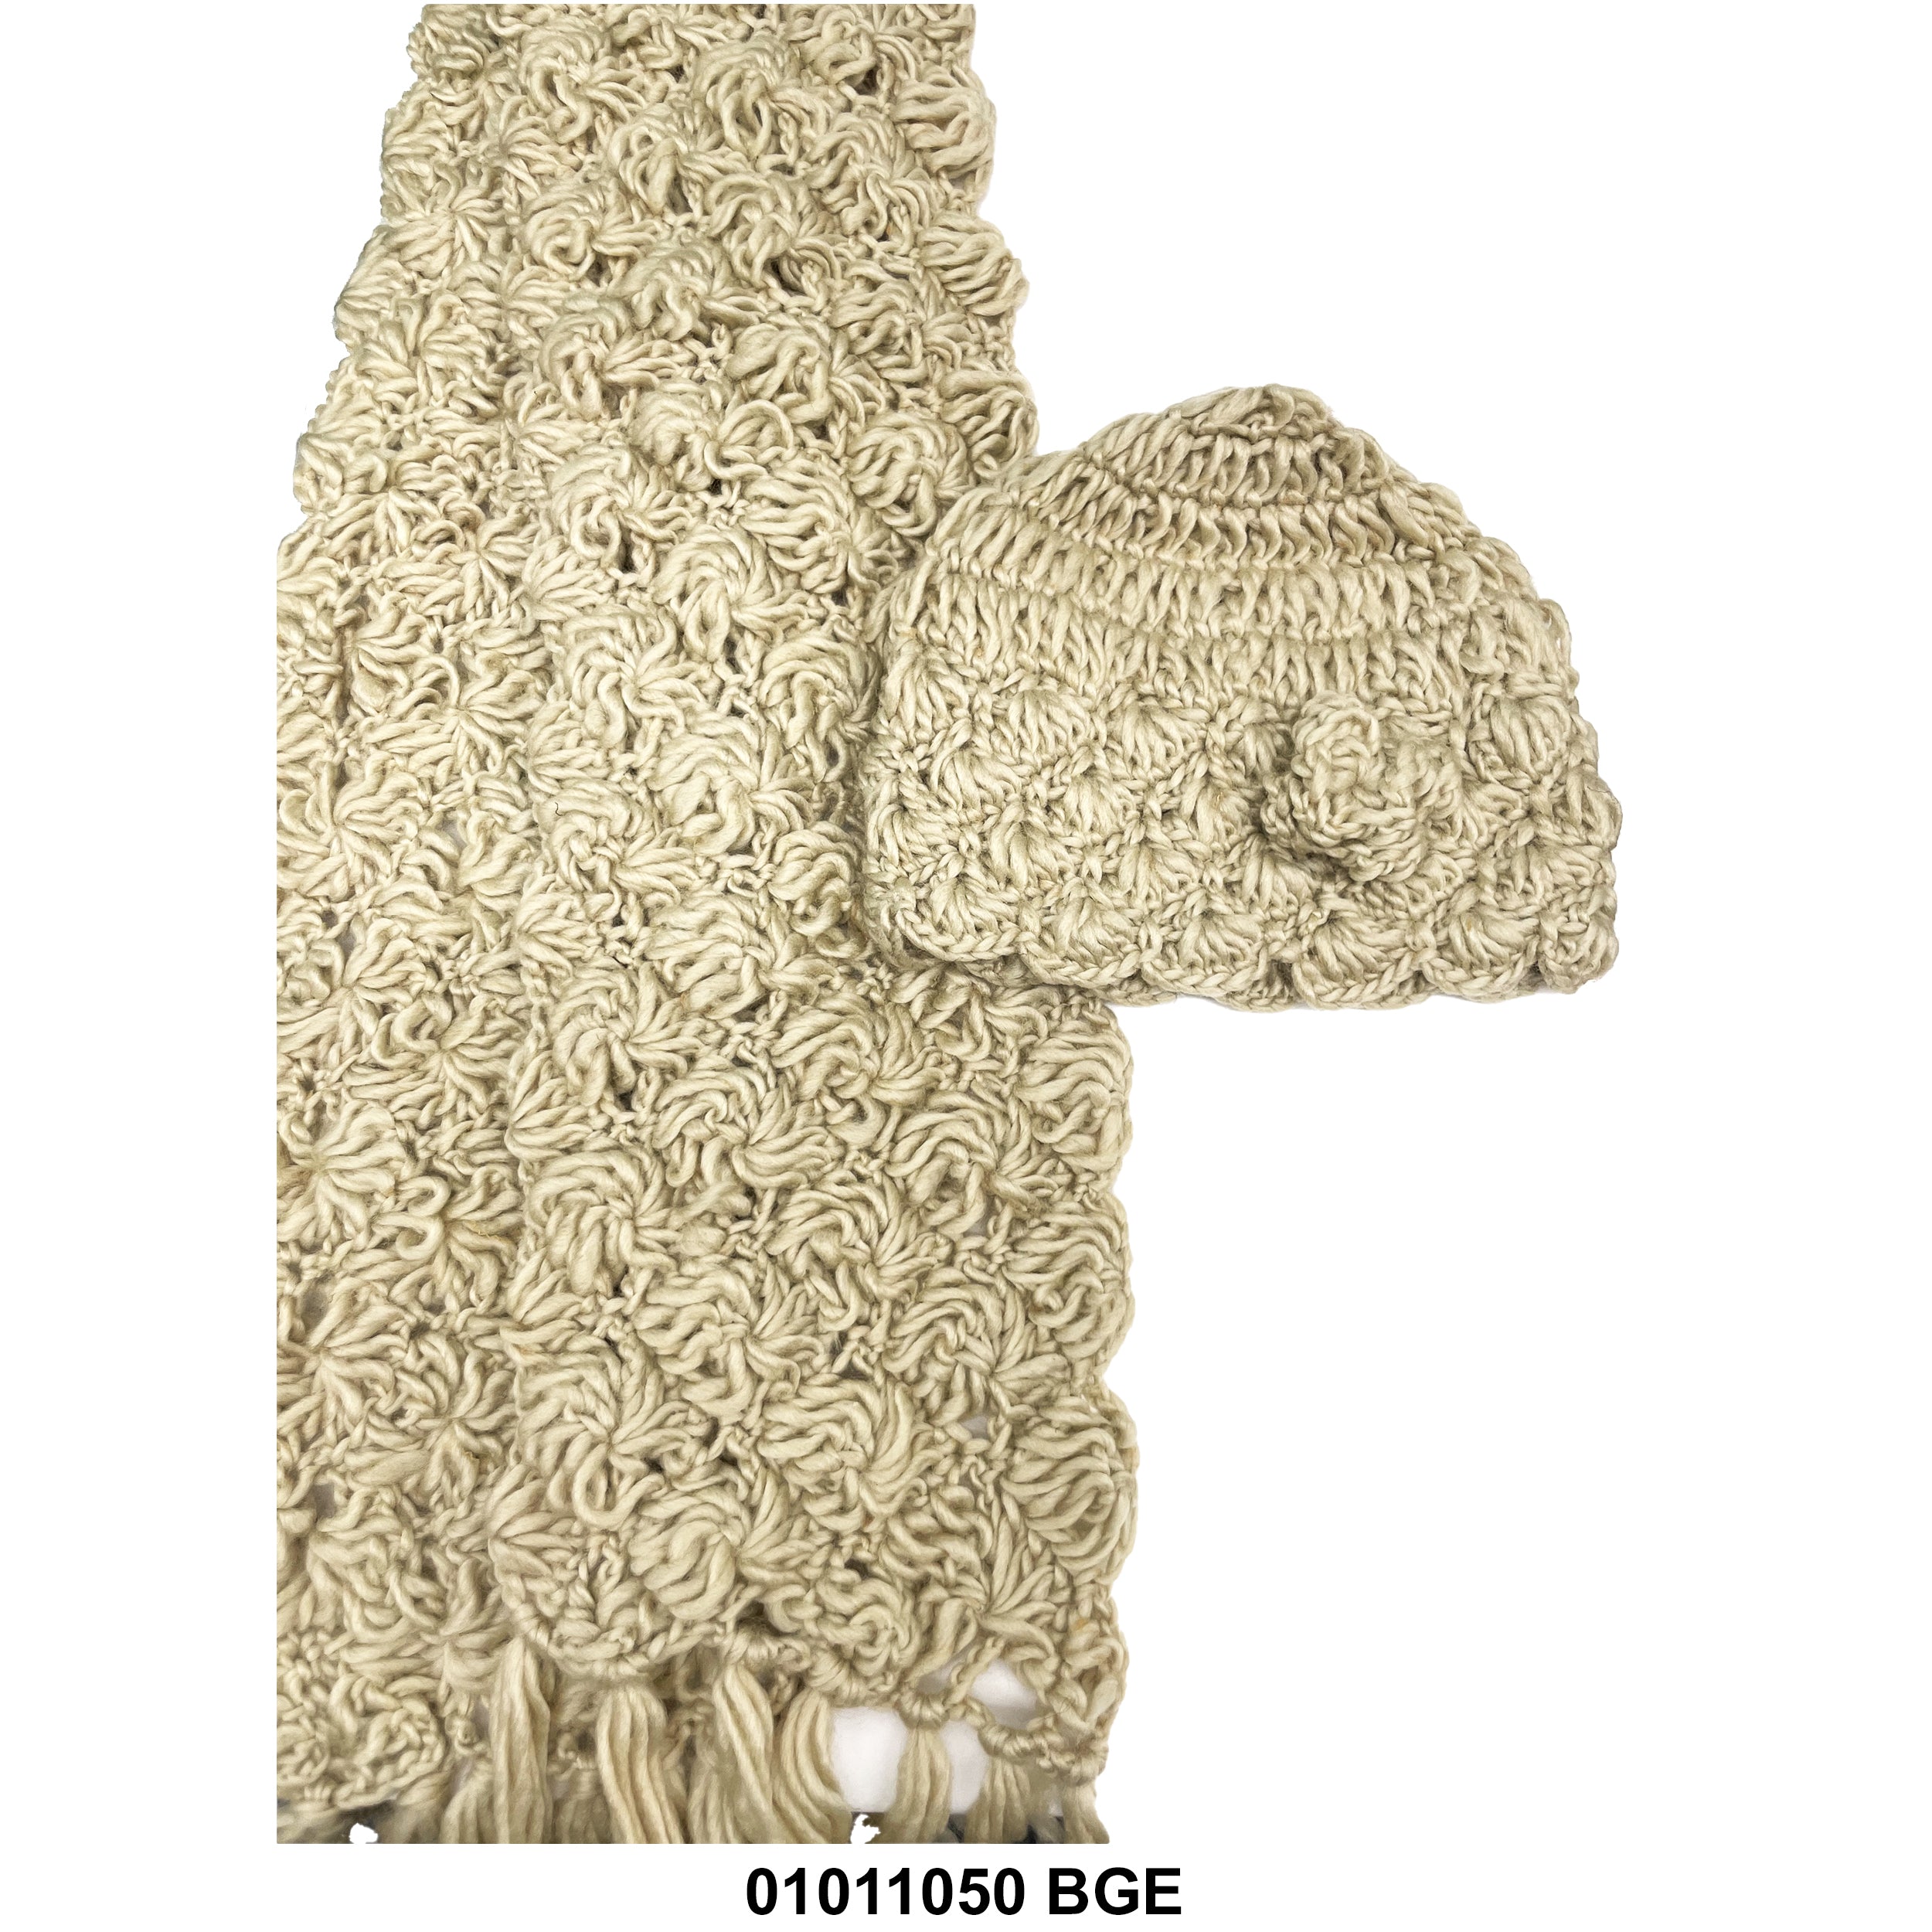 Winter Warm Knitted Beanies And Scarf Set 01011050 BGE